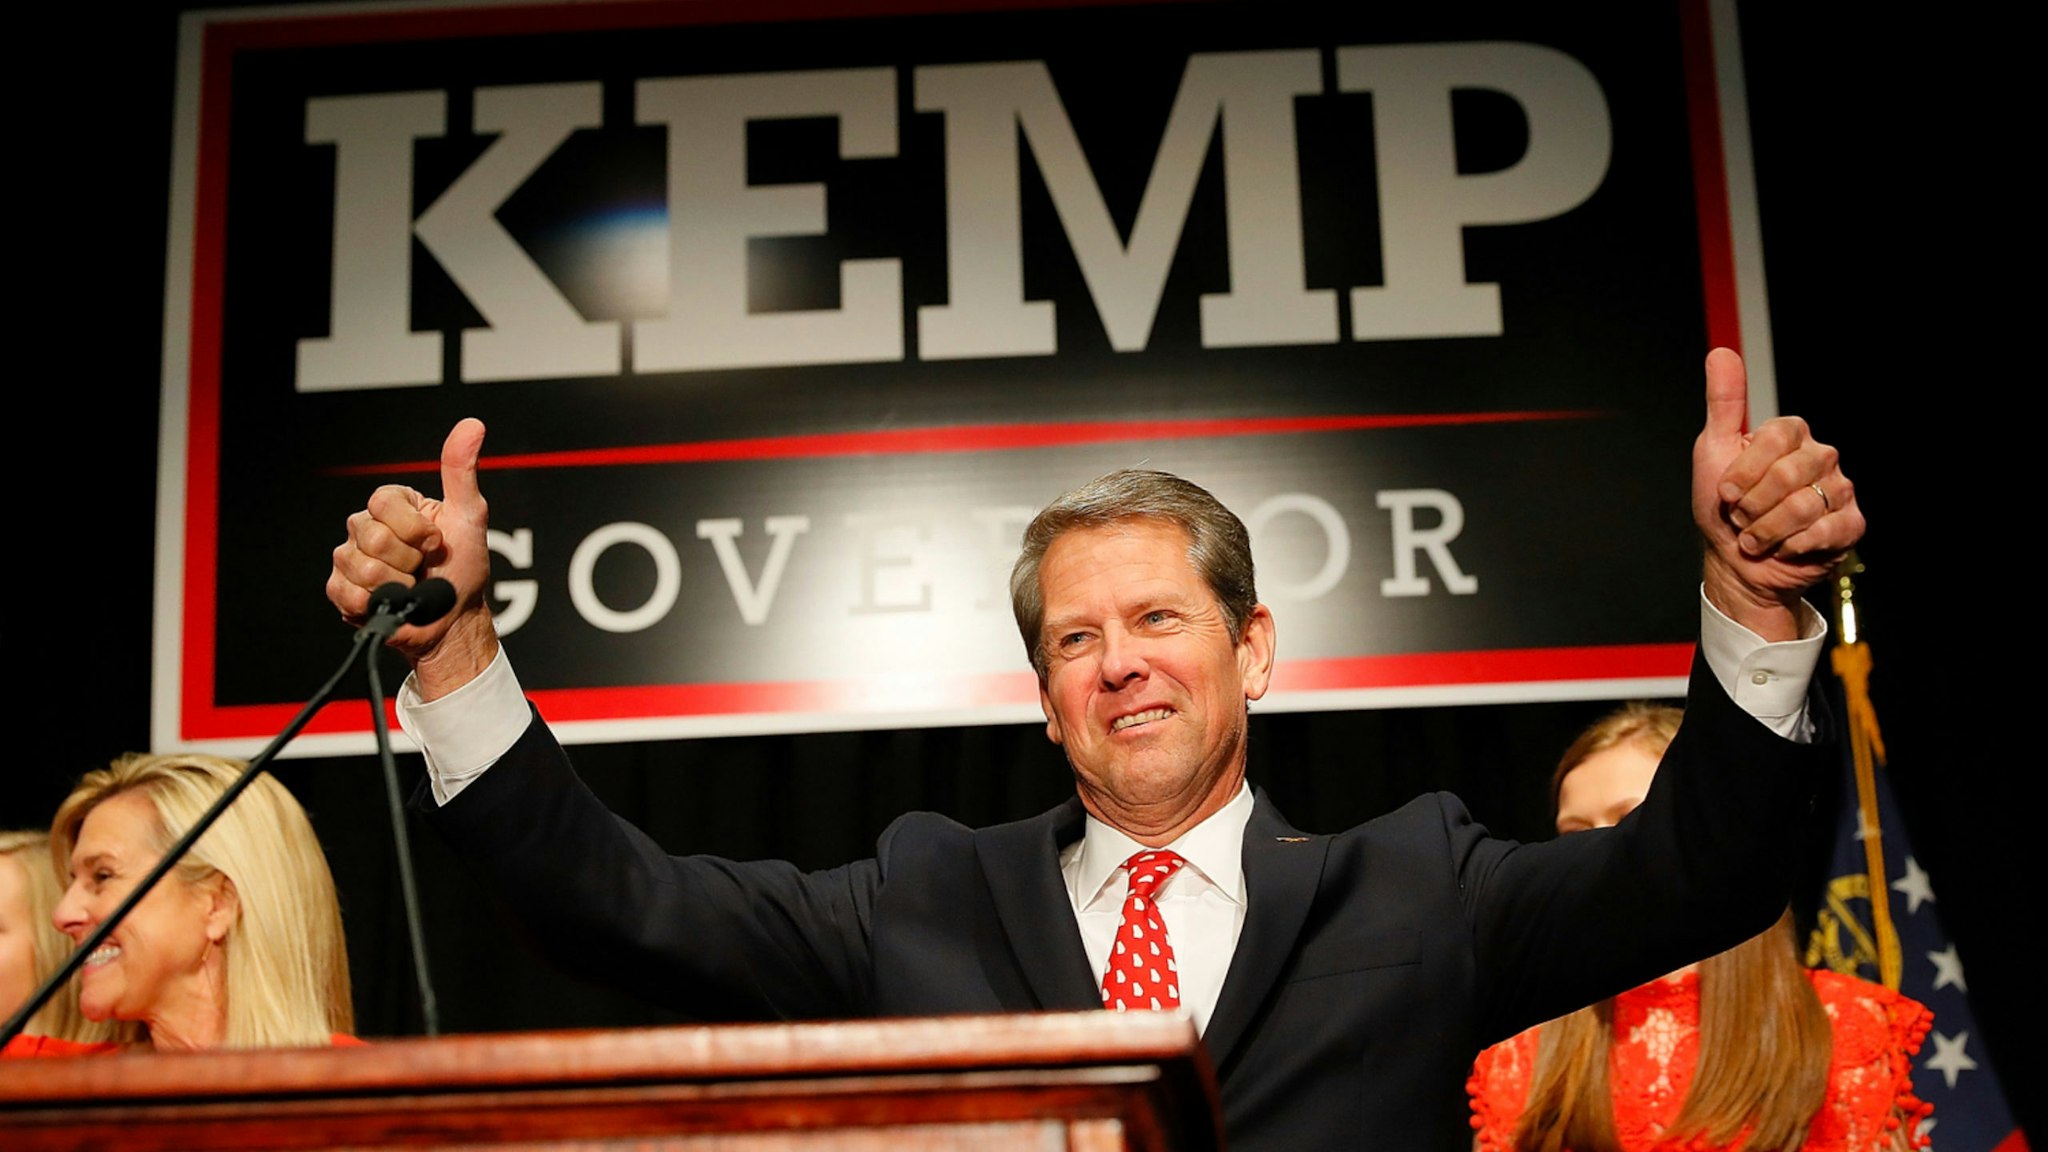 Republican gubernatorial candidate Brian Kemp attends the Election Night event at the Classic Center on November 6, 2018 in Athens, Georgia.